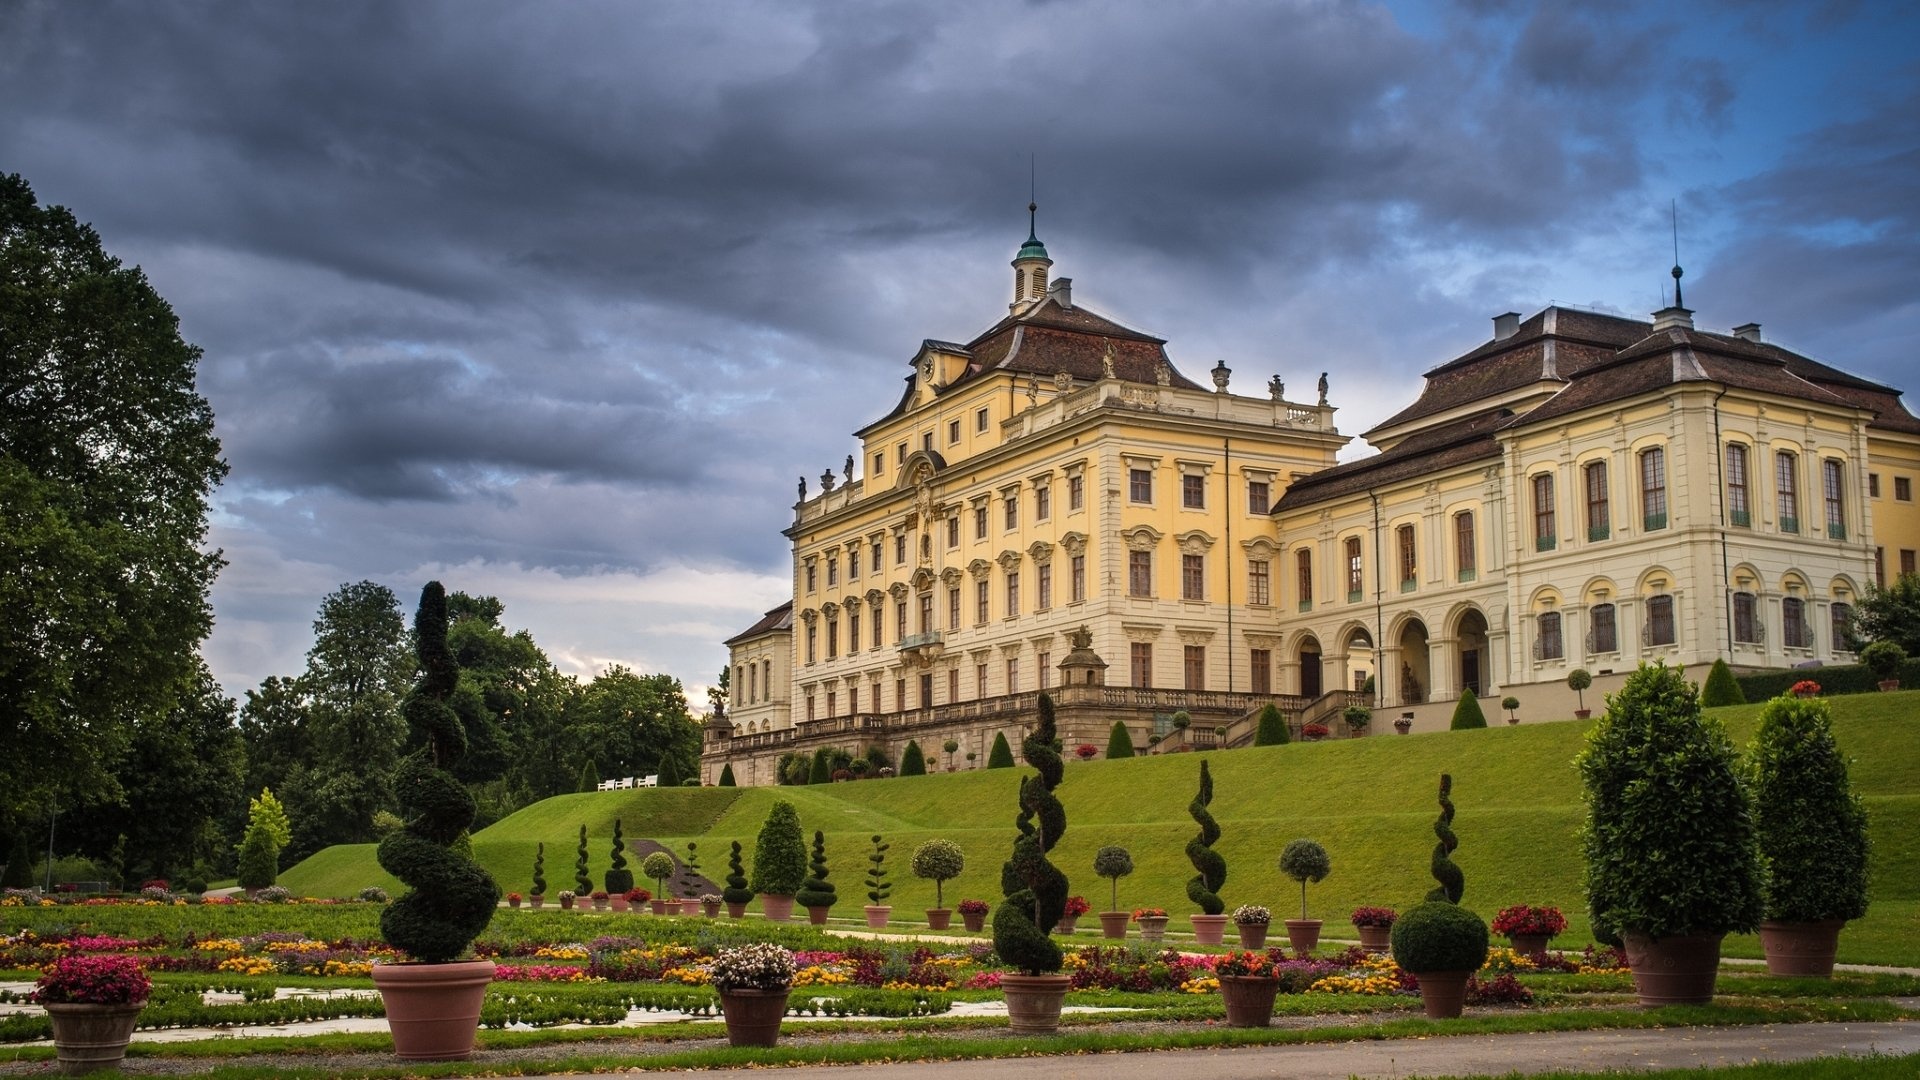 Palace: Ludwigsburg Palace, The largest palatial estate in the country, Germany. 1920x1080 Full HD Wallpaper.